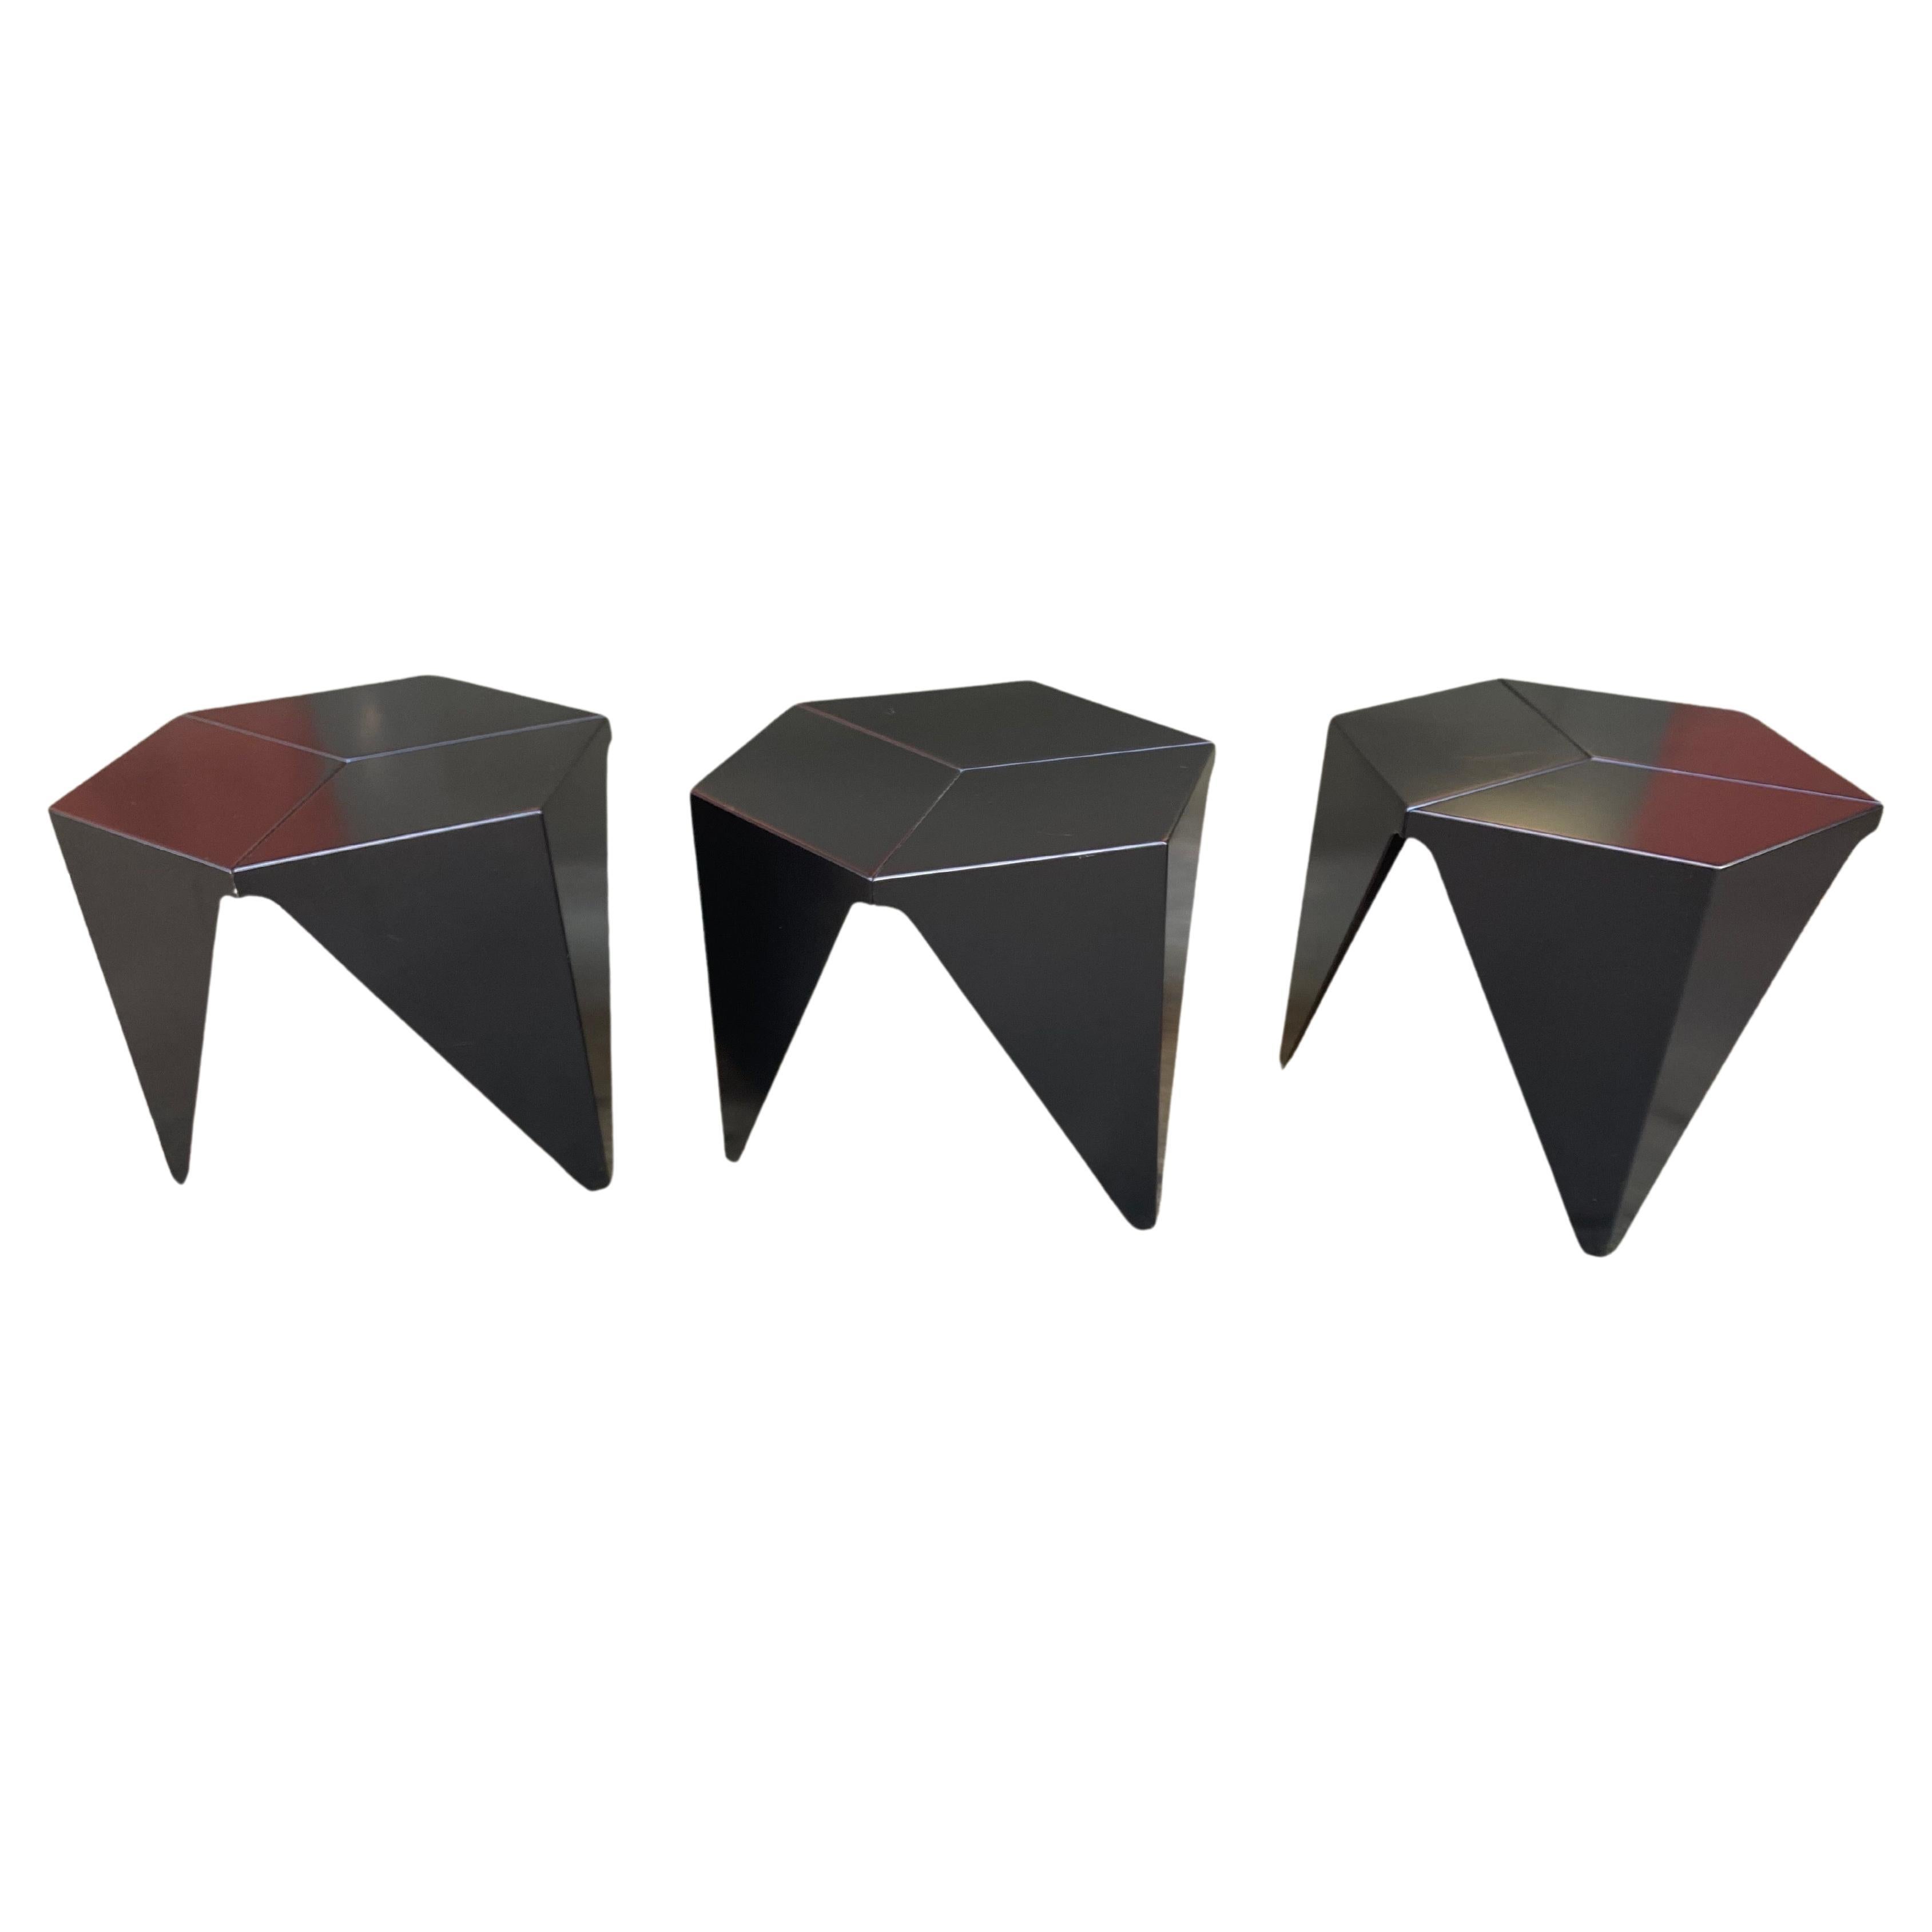 Noguchi Prismatic Tables for Vitra, 2 Available, priced separately! For Sale